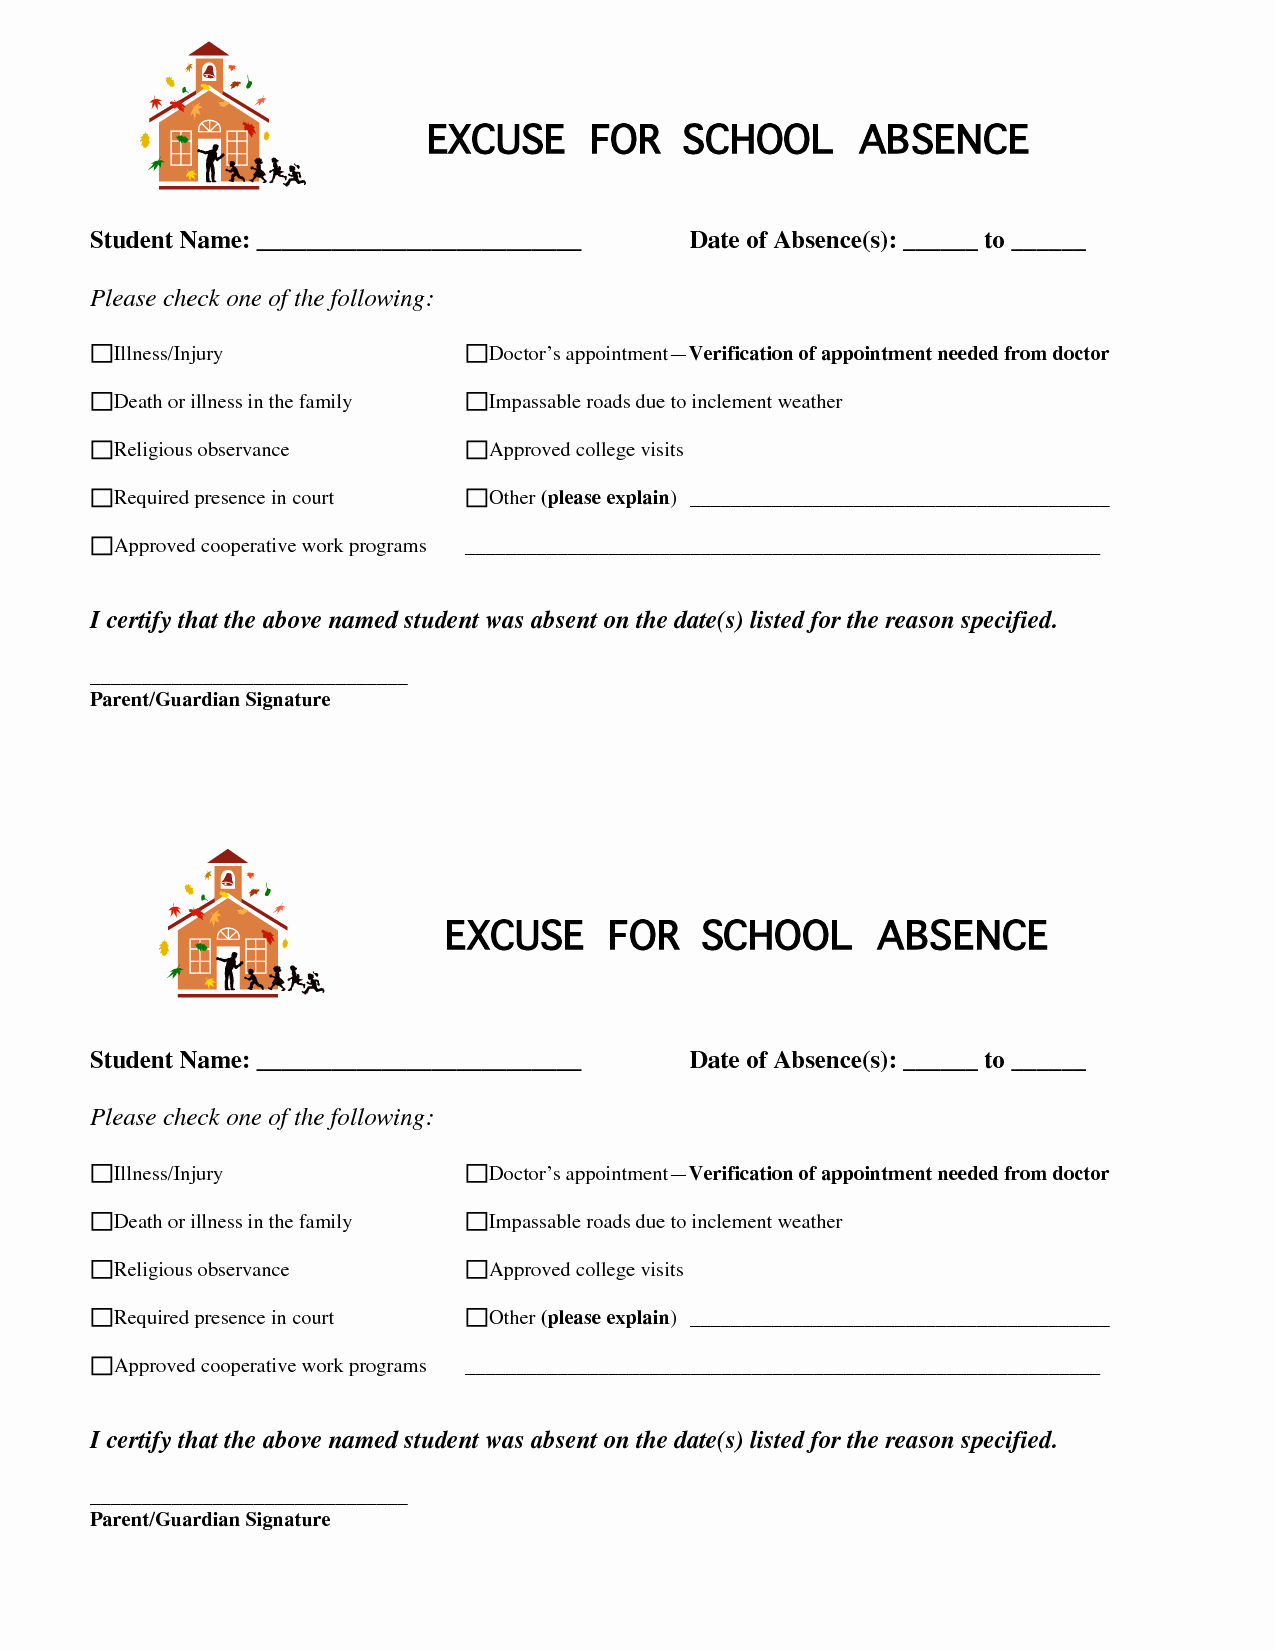 Excuse Absence From School Letter Inspirational 8 Best Of Printable for School Absence Excuses